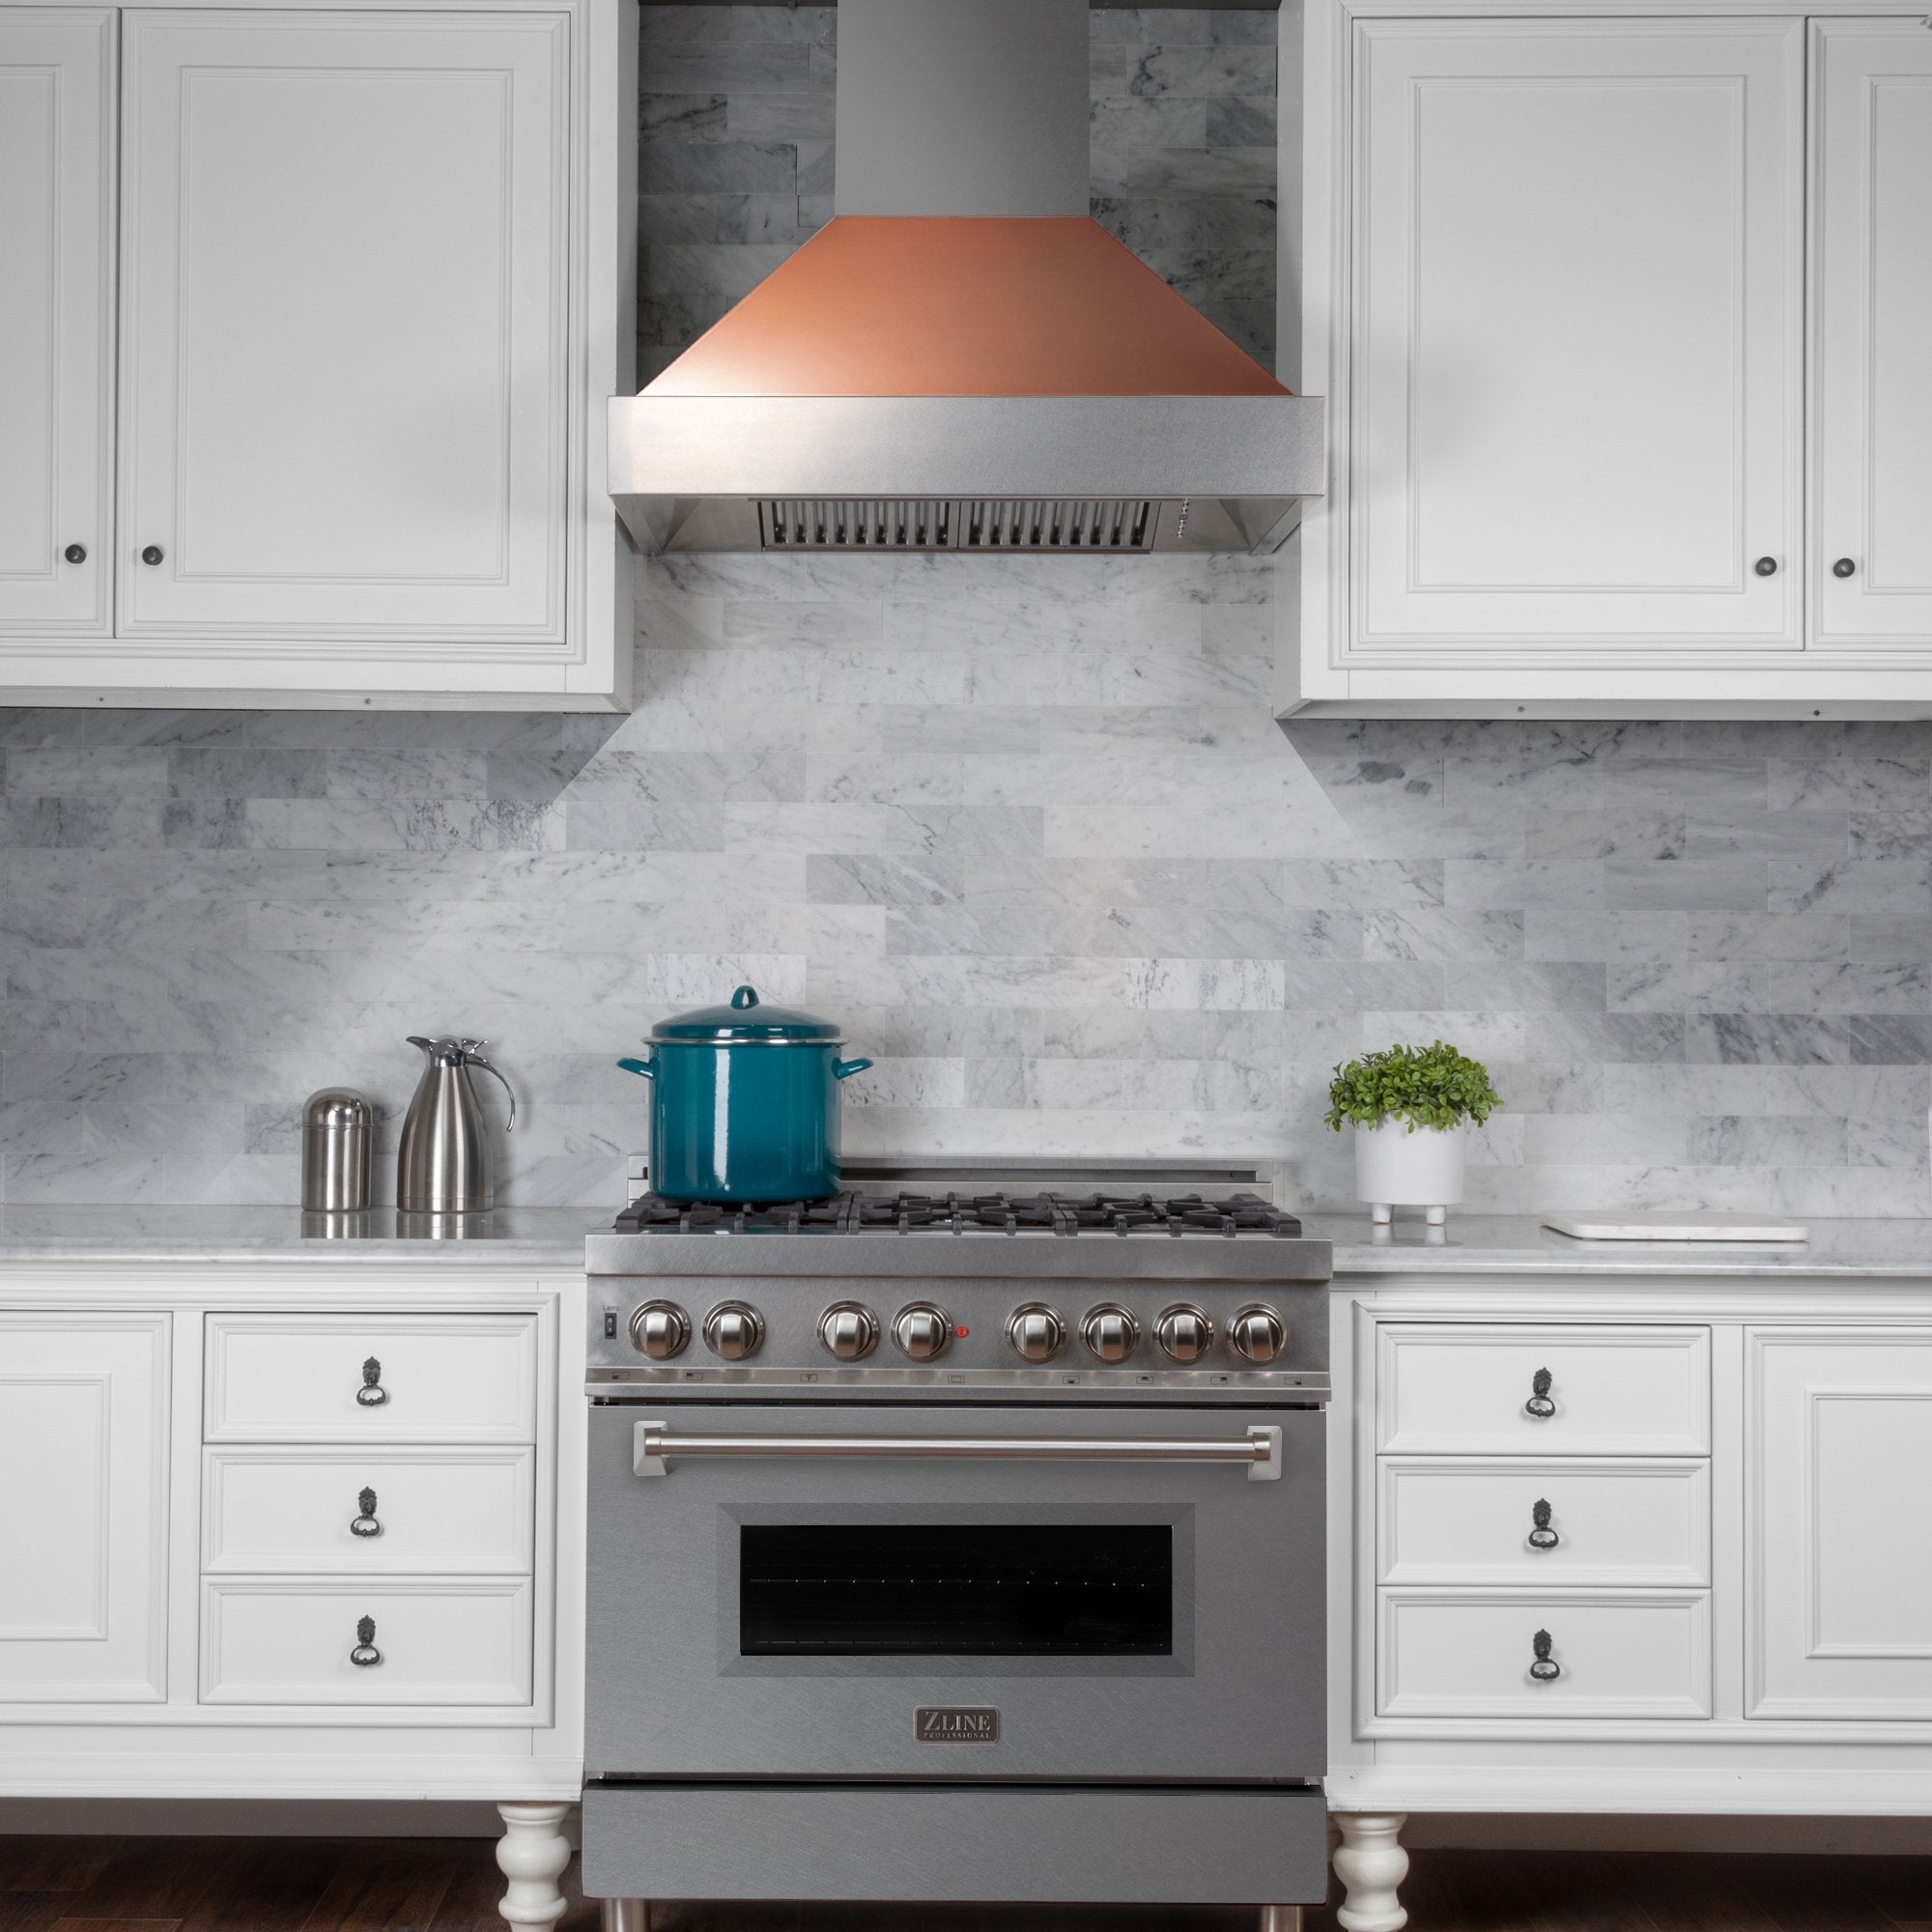 36" Ducted Fingerprint Resistant Stainless Steel Range Hood with Copper Shell (8654C-36)